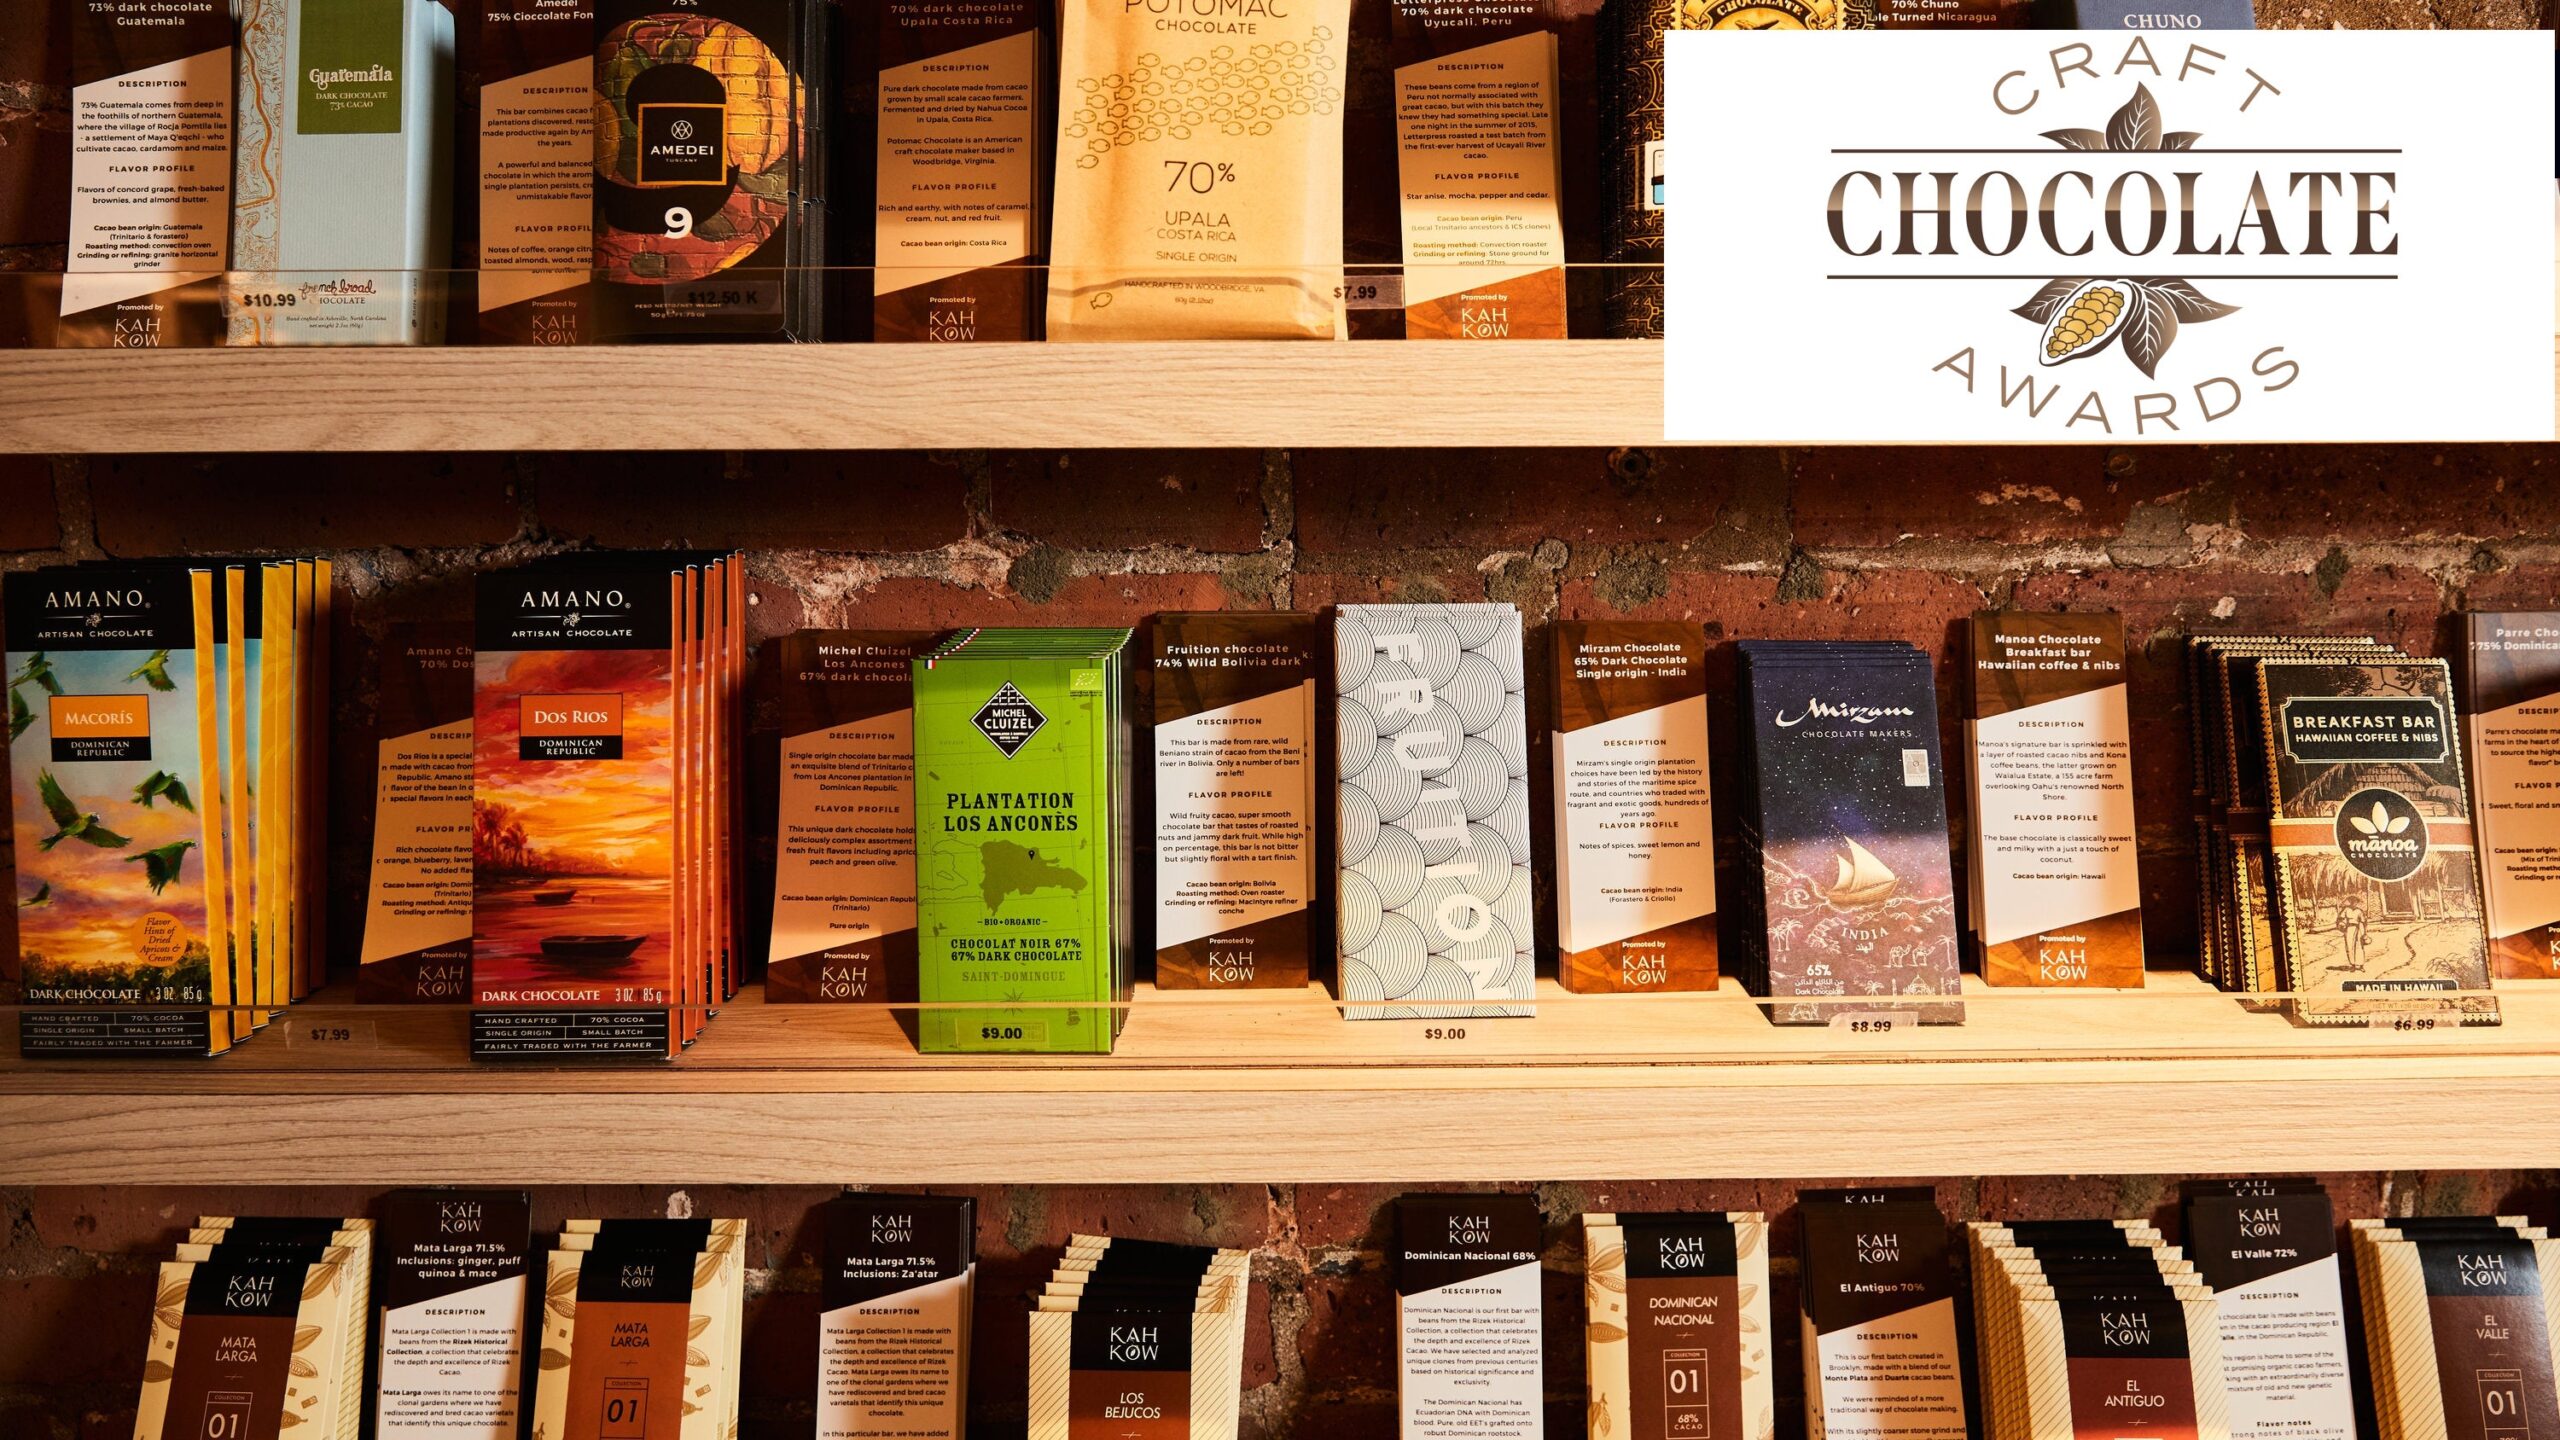 Bean-to-bar chocolate bars with beautiful wrappers on a wooden shelf.